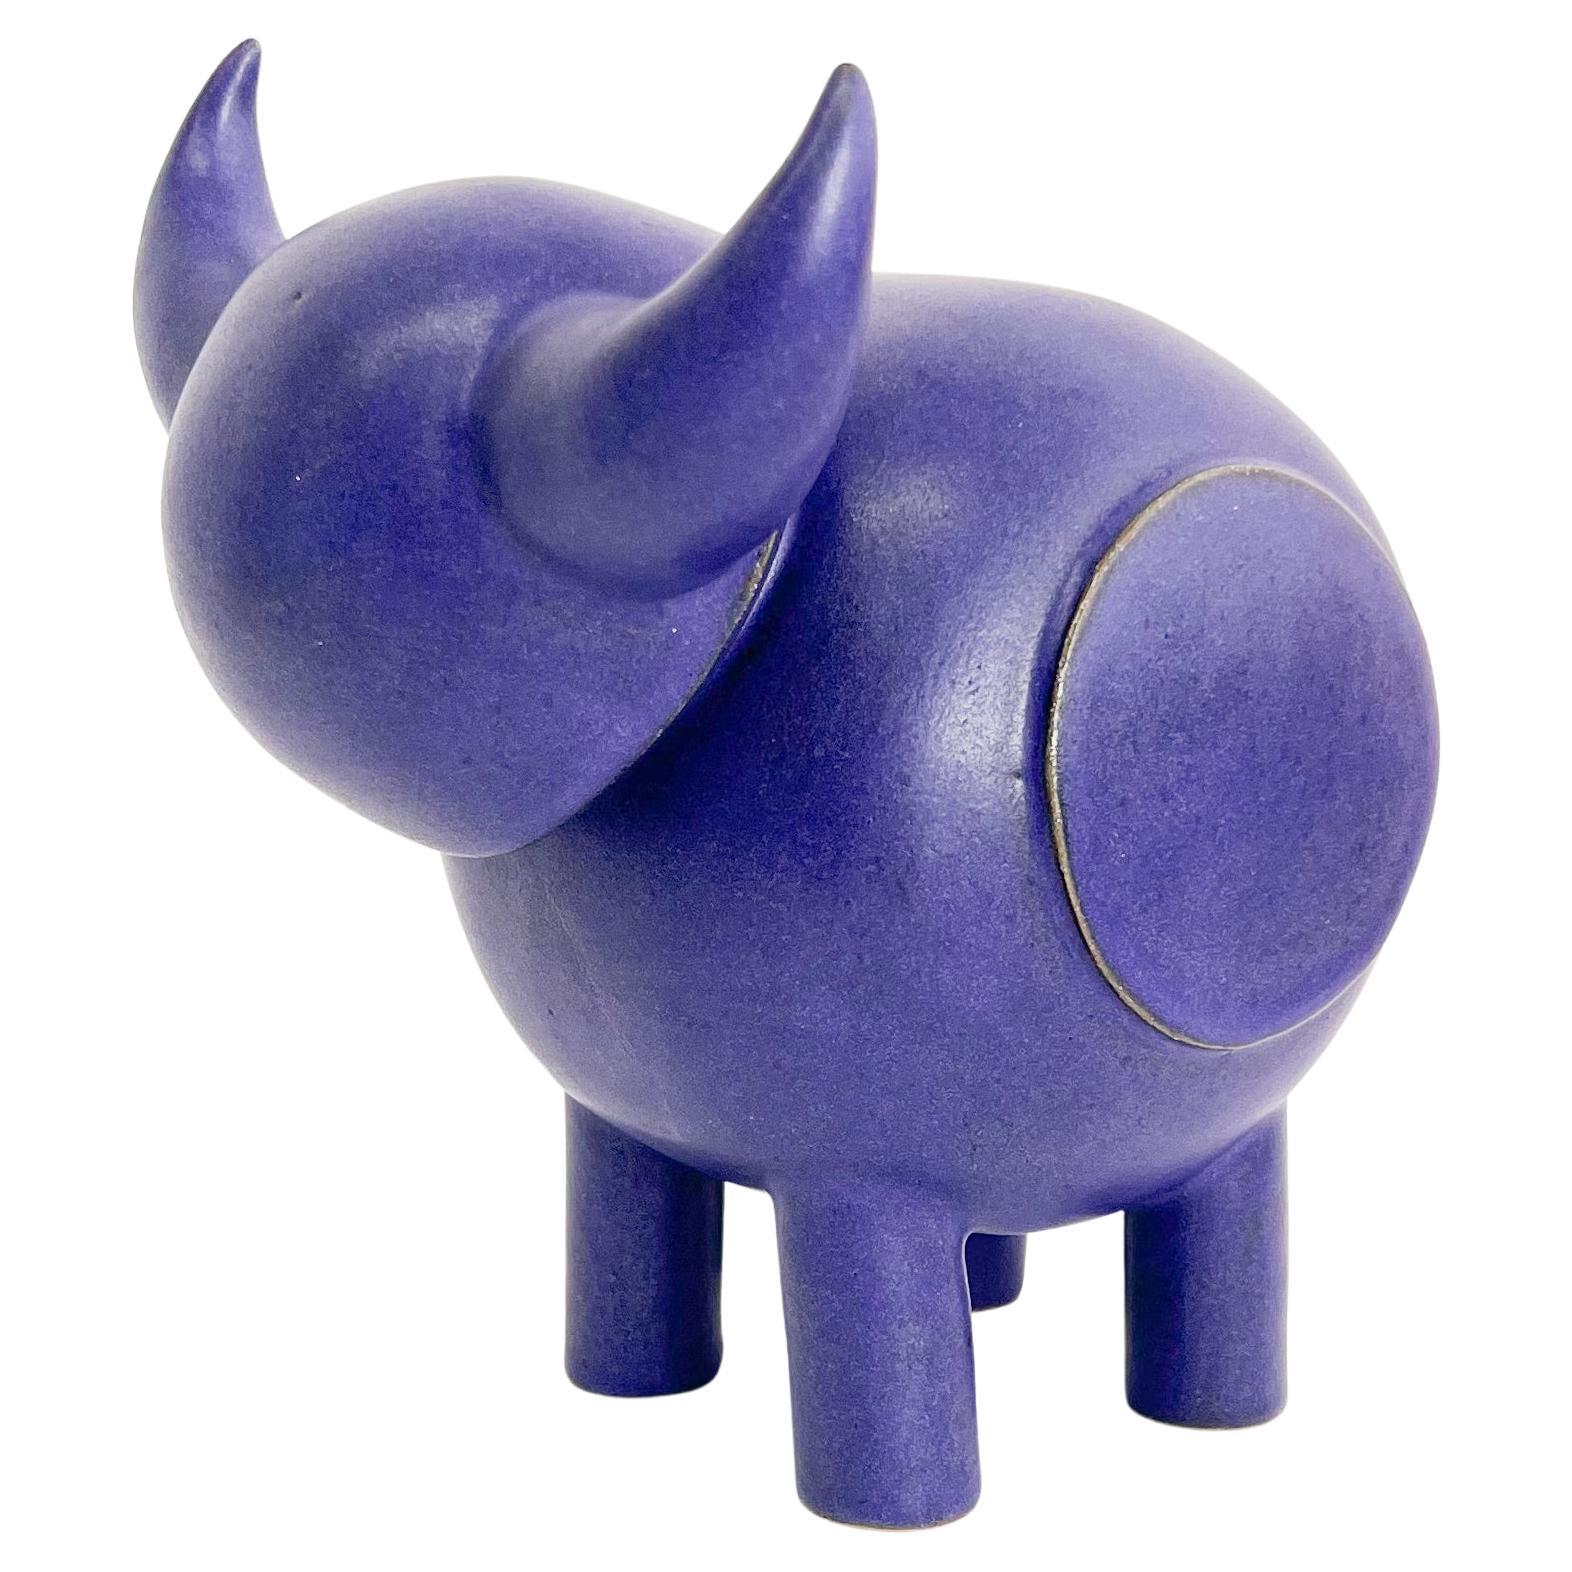 Ceramic Stoneware Contemporary Animal "Bully" Sculpture by Keavy Murphree For Sale